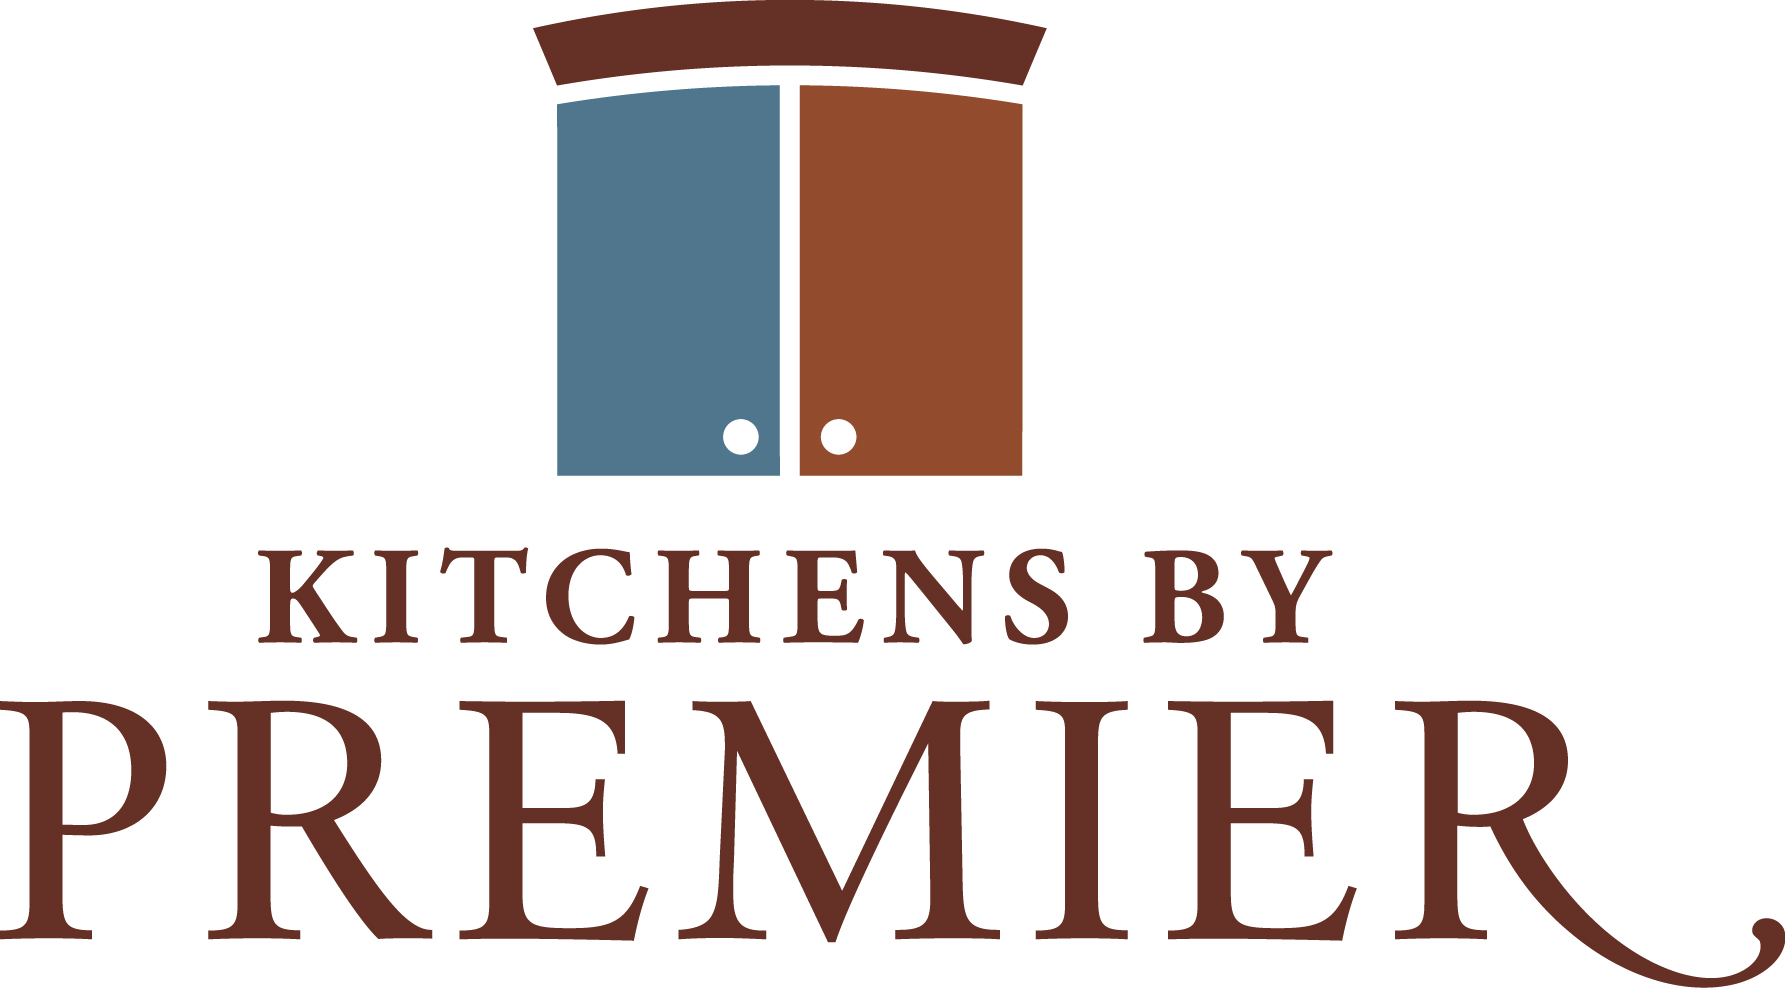 Kitchens by Premier Highlighted Why It Is Important to Work With a Remodeling Contractor For Kitchen Remodeling Projects